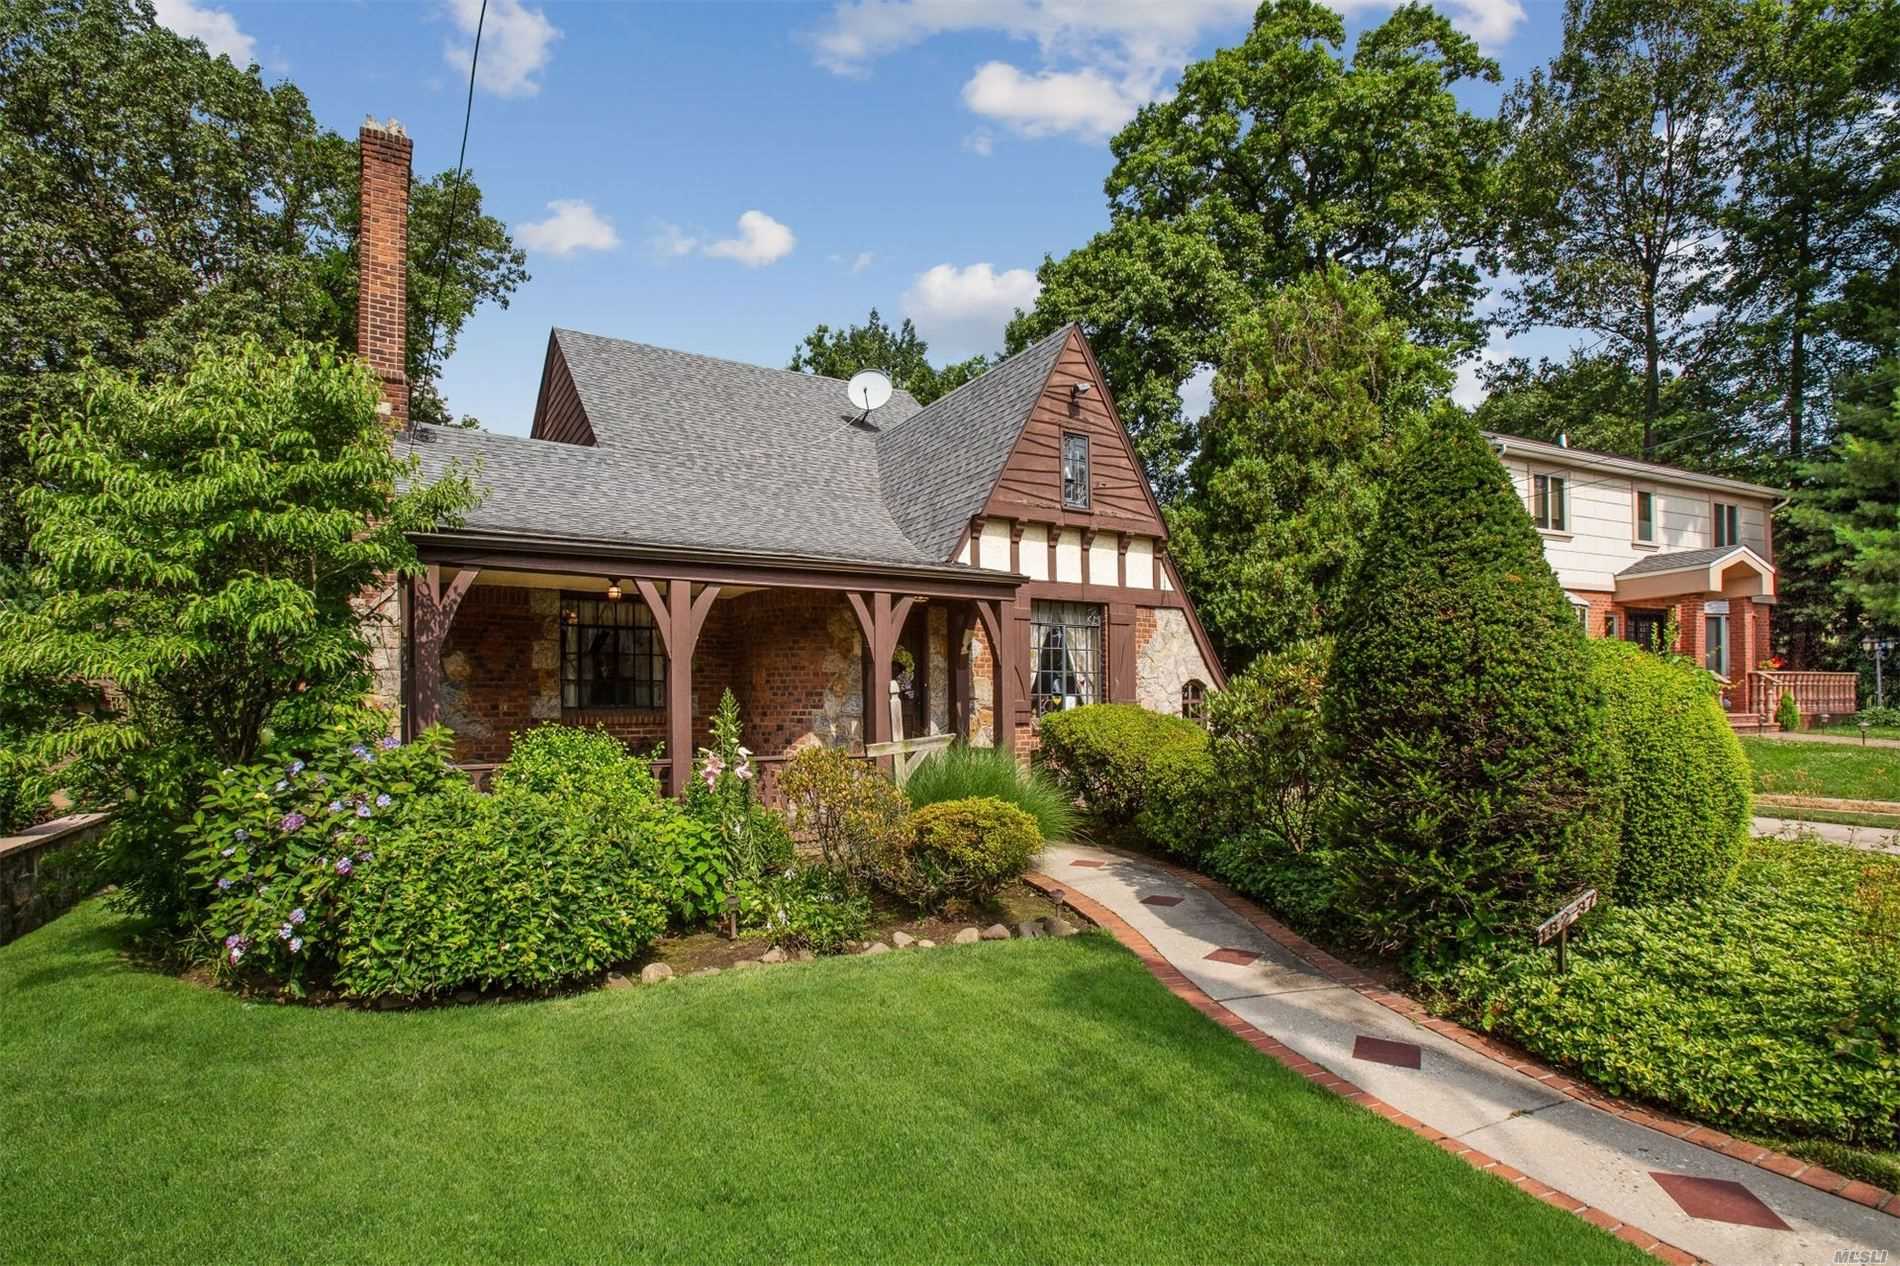 Charming Tudor in the heart of Jamaica Estates, Prime Location! This unique private piece of property features lots of original character & stained glass windows. New Kitchen w/granite counters. Over-sized 2 car garage. Mint wood floors. Updated baths. Convenient location, close to highways, shopping and houses of worship. Must See!